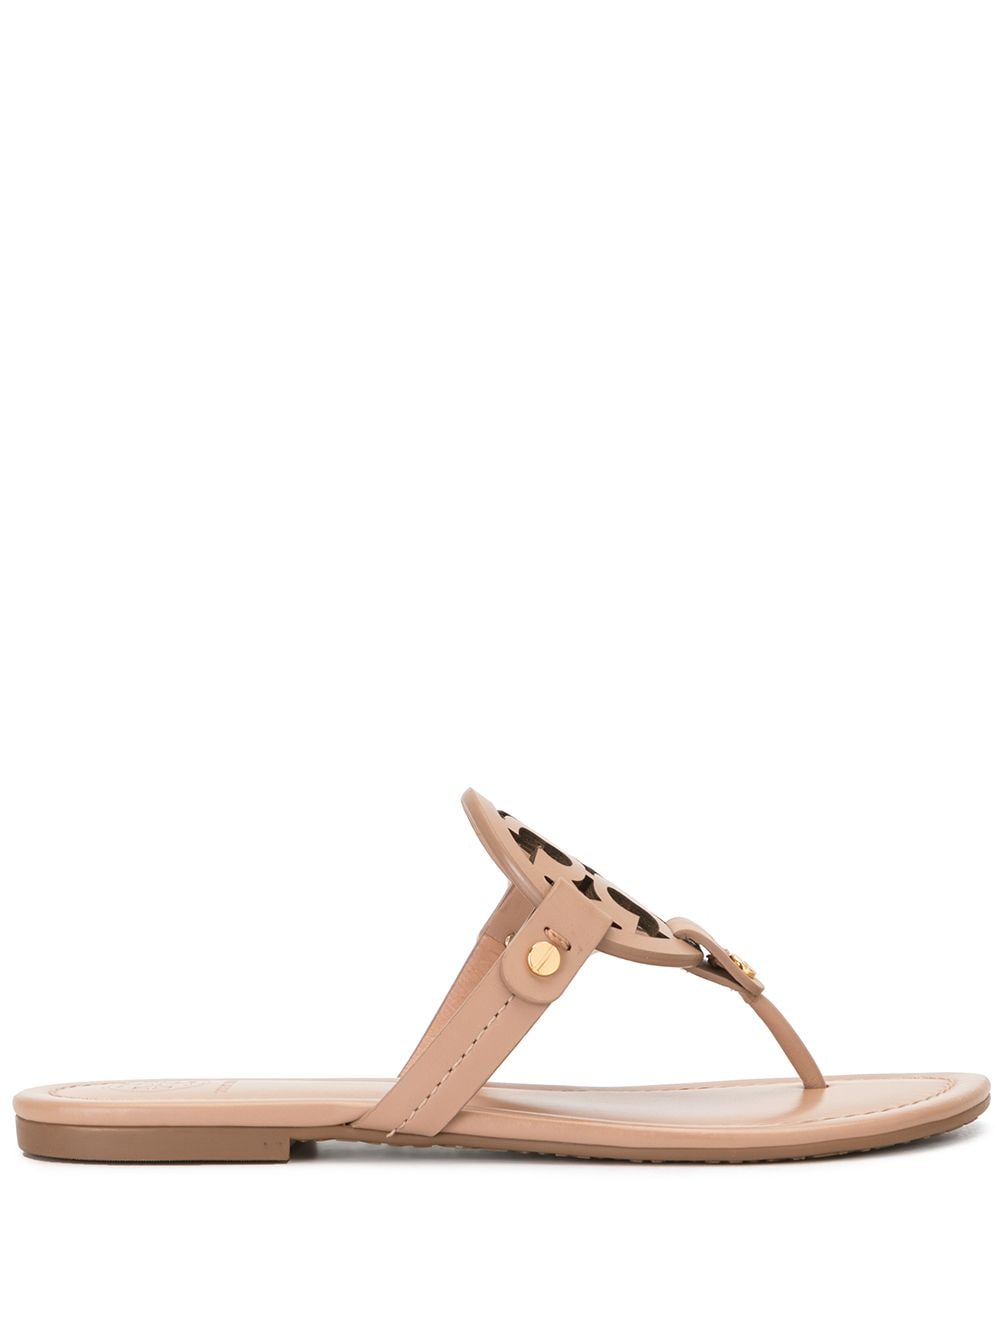 Image 1 of Tory Burch T-medallion sandals